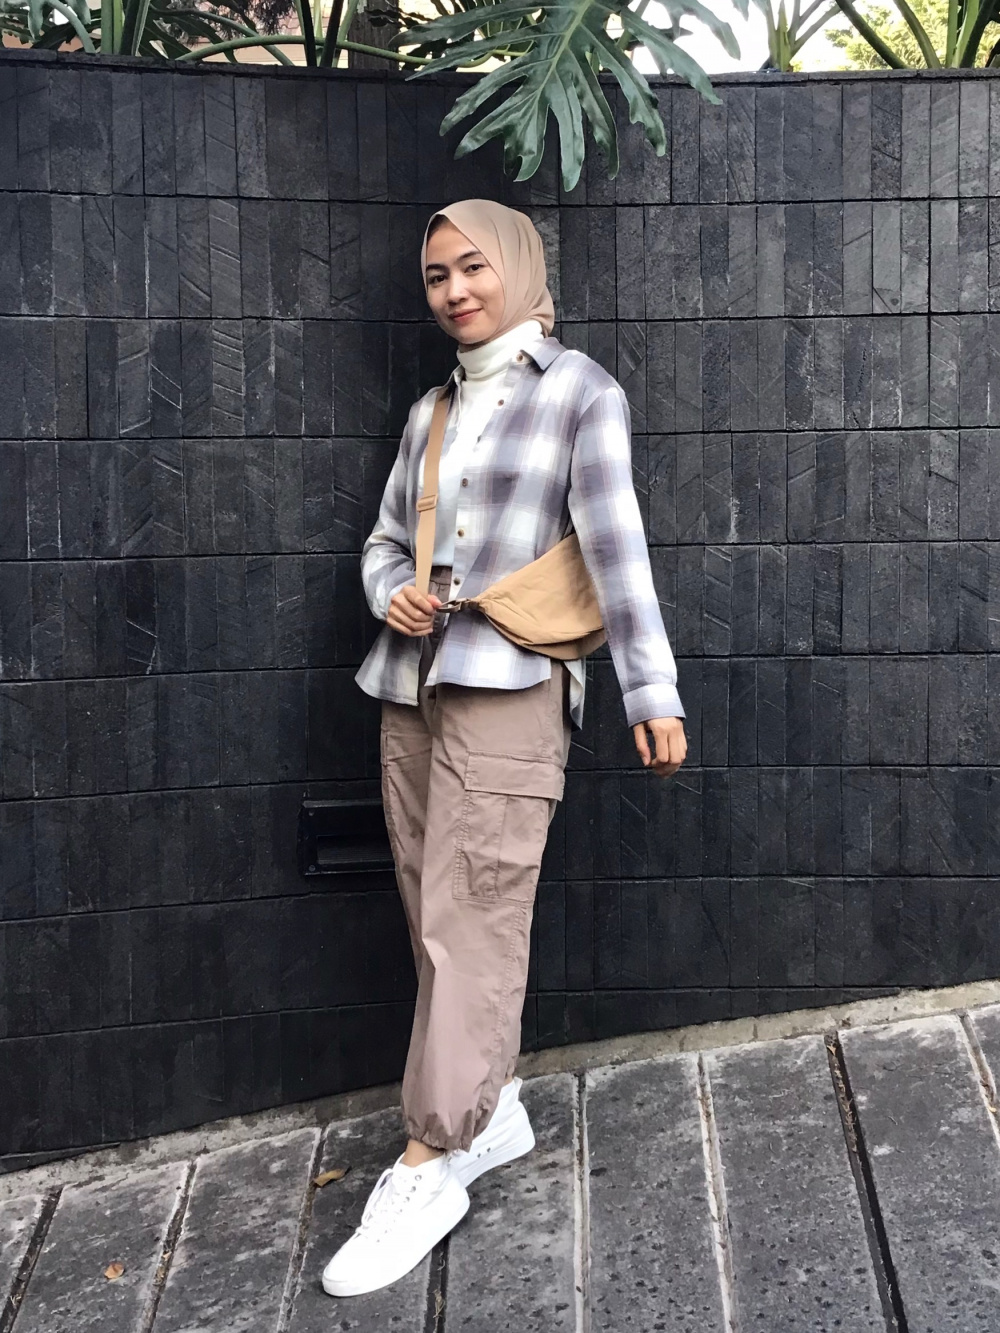 Check styling ideas for「EASY CARGO PANTS」